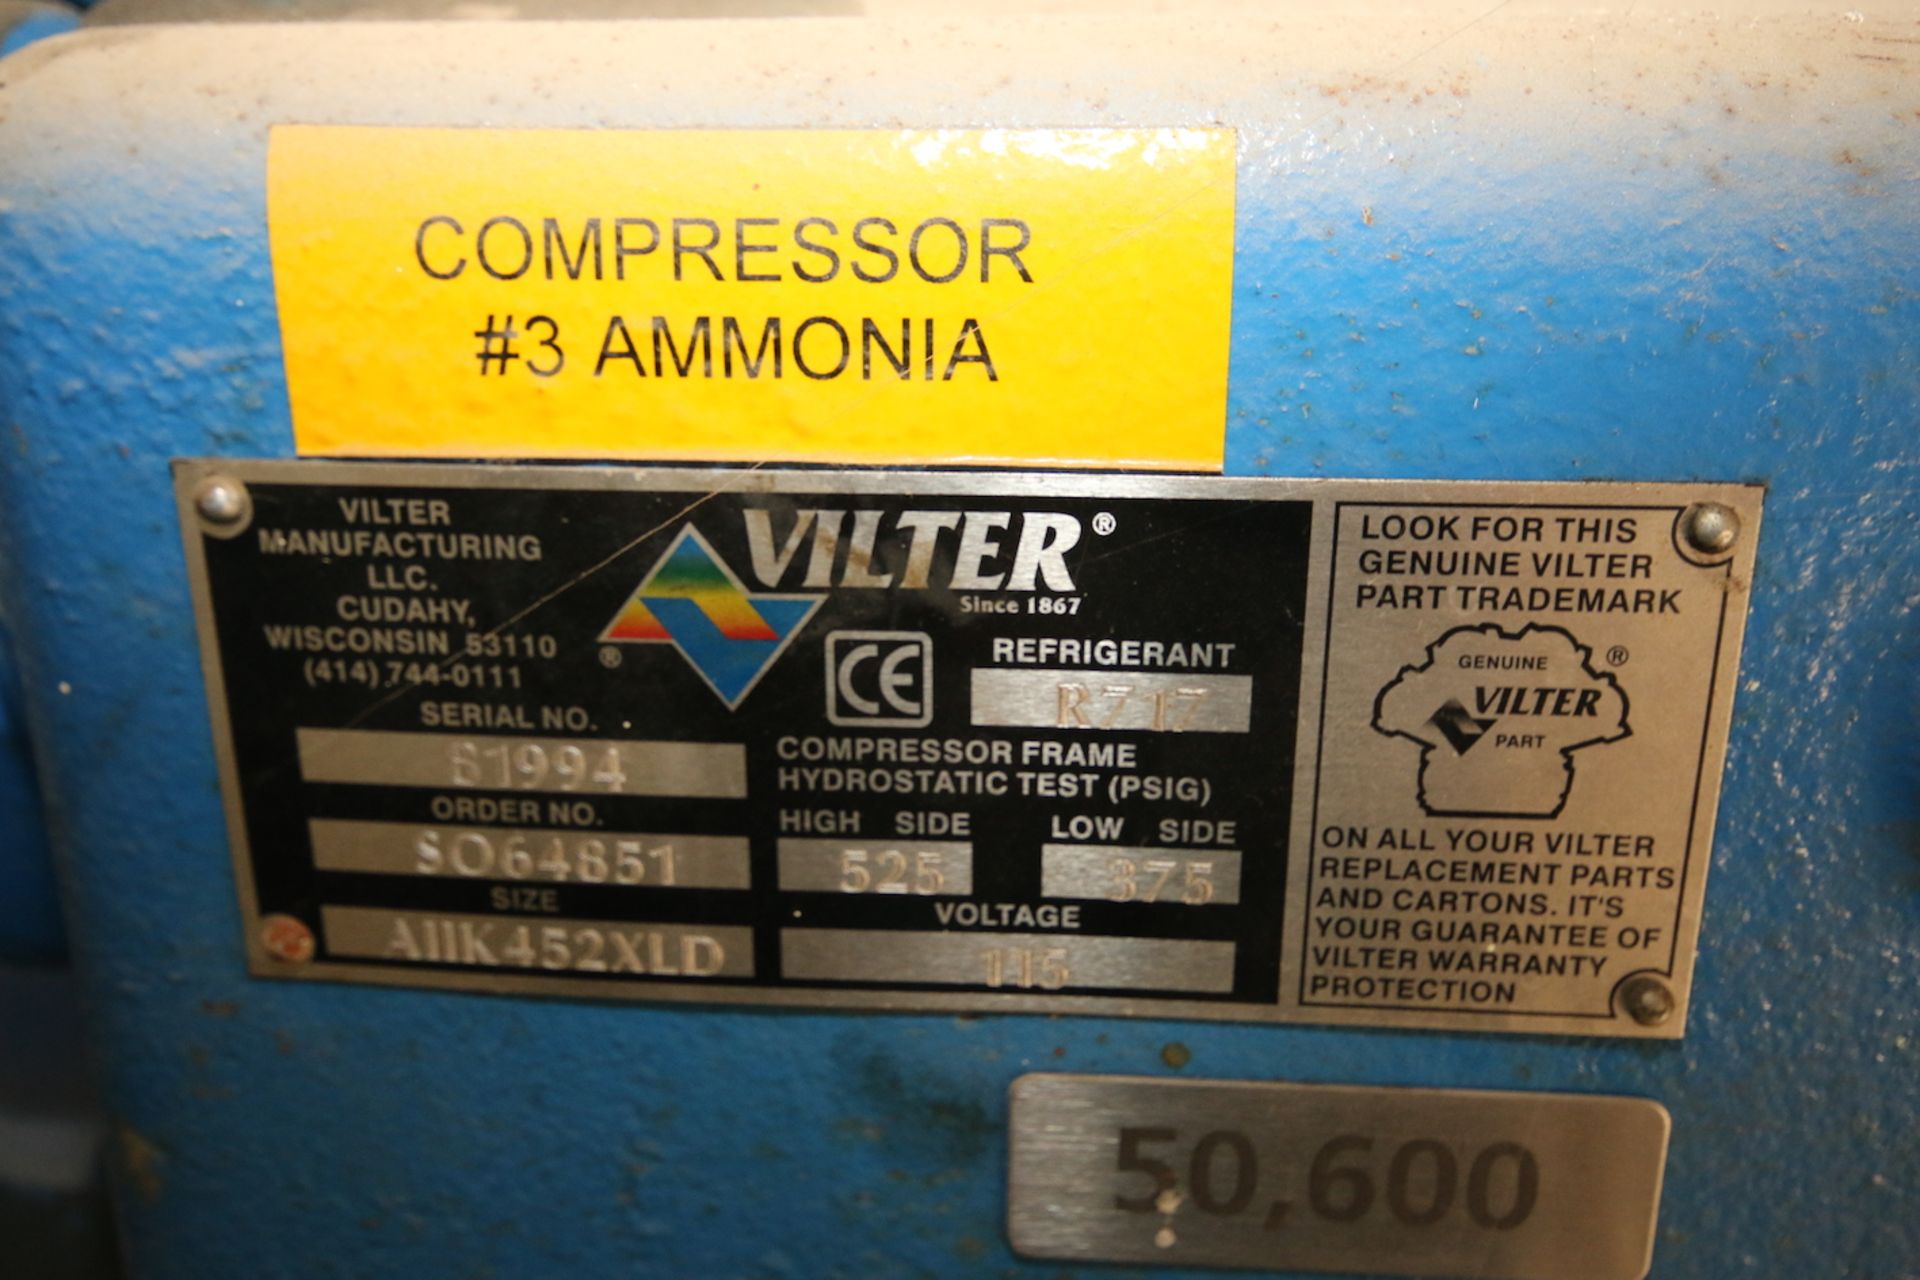 Vilter 2 - Cylinder @ 40 hp Ammonia Recip Compressor, Size 411K452XLD, Order No. SO64851, SN S1994 - Image 5 of 7